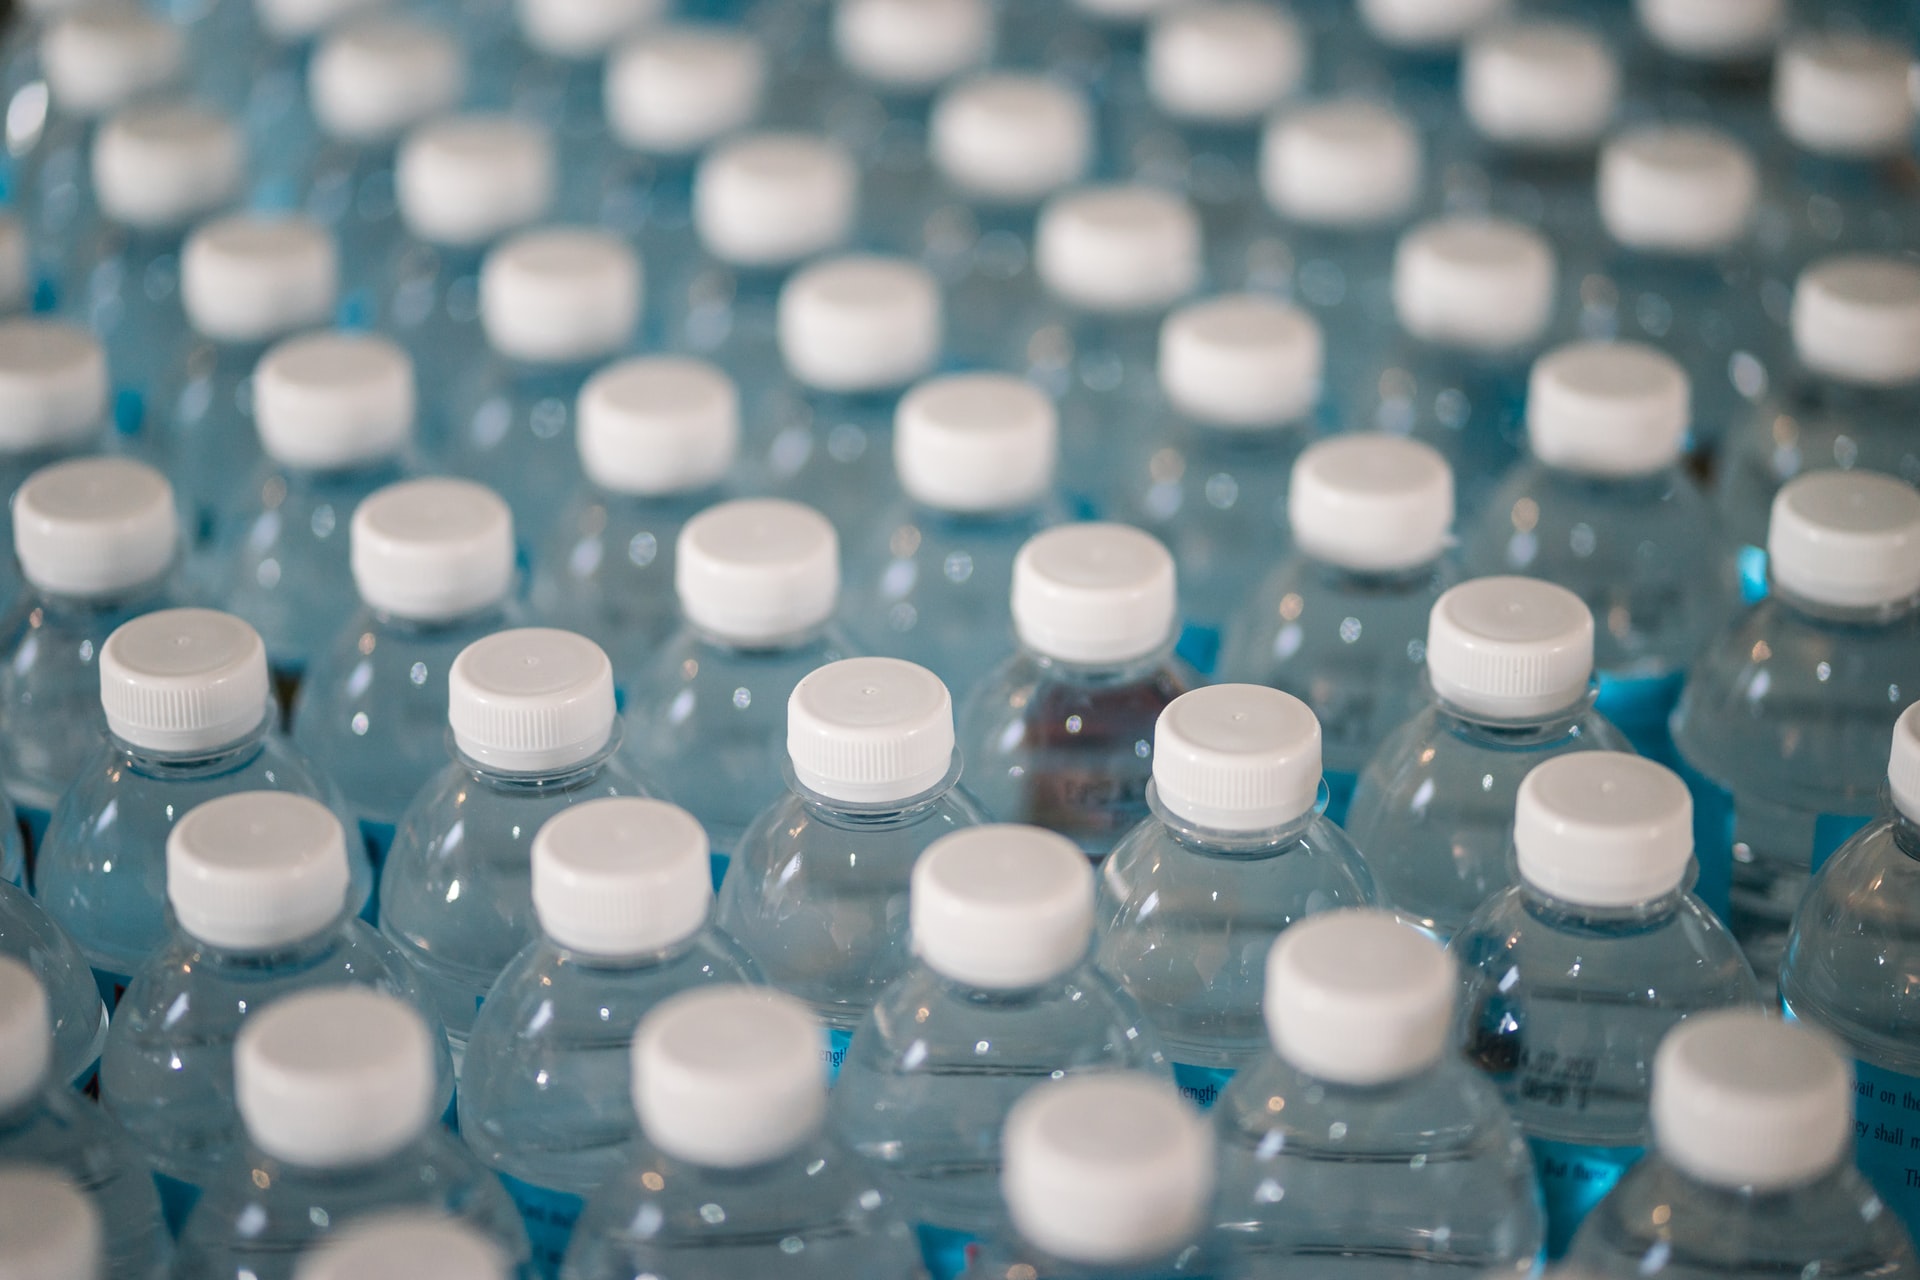 hopeful for the future of bottled water brands